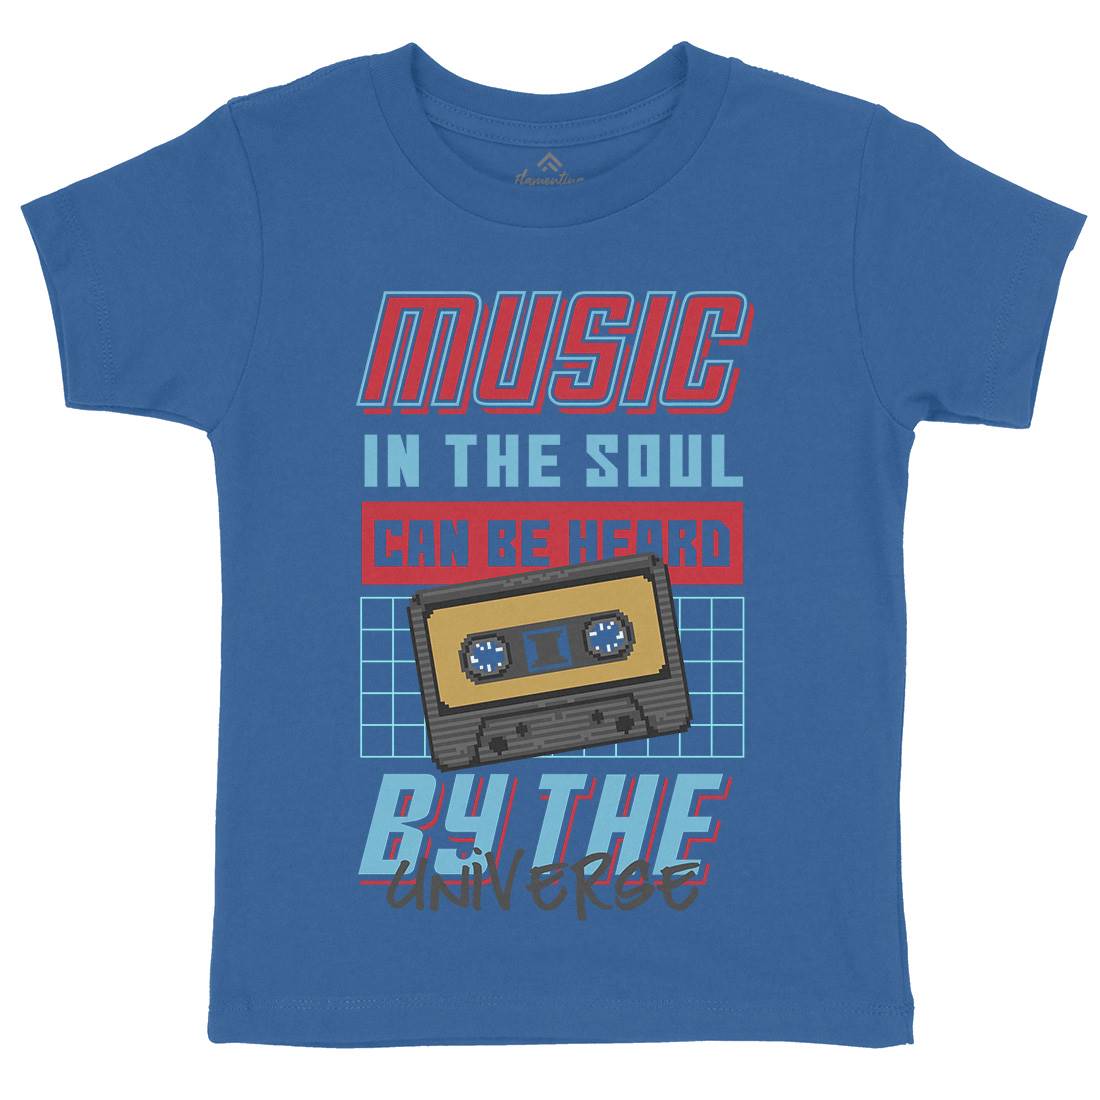 In The Soul Can Be Heard By The Universe Kids Crew Neck T-Shirt Music B935